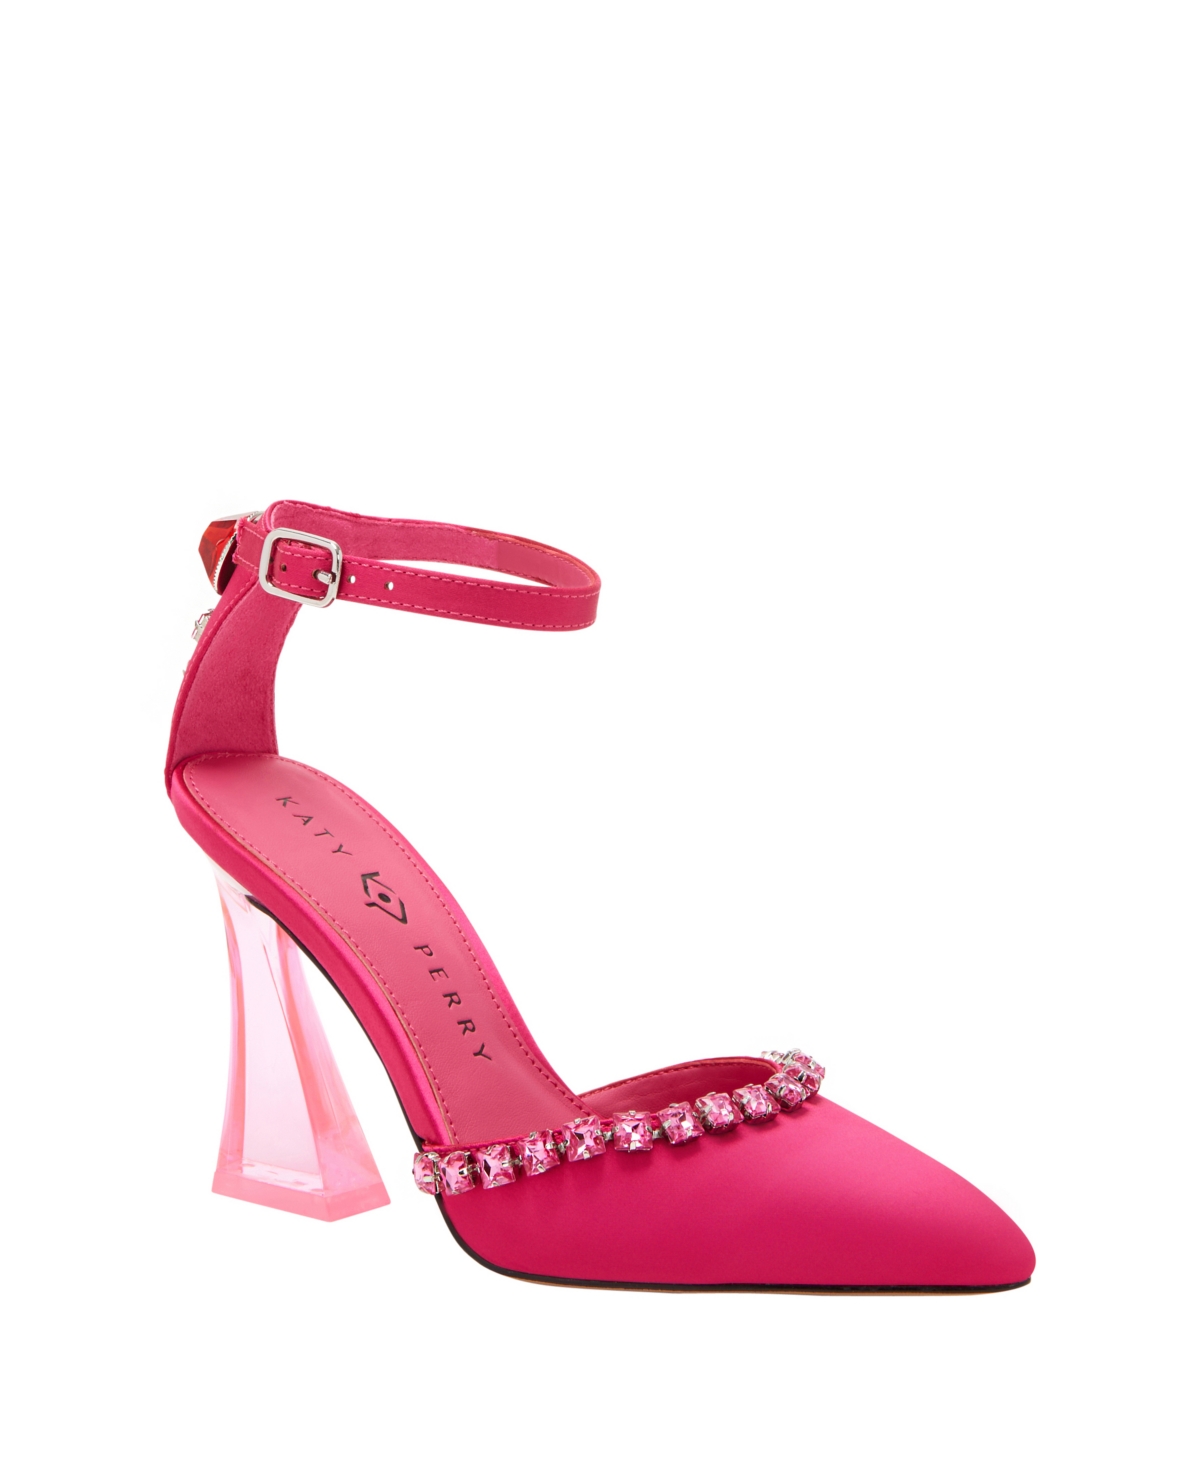 Shop Katy Perry Women's The Lookerr Closed Toe Lucite Heel Pumps In Luminous Pink